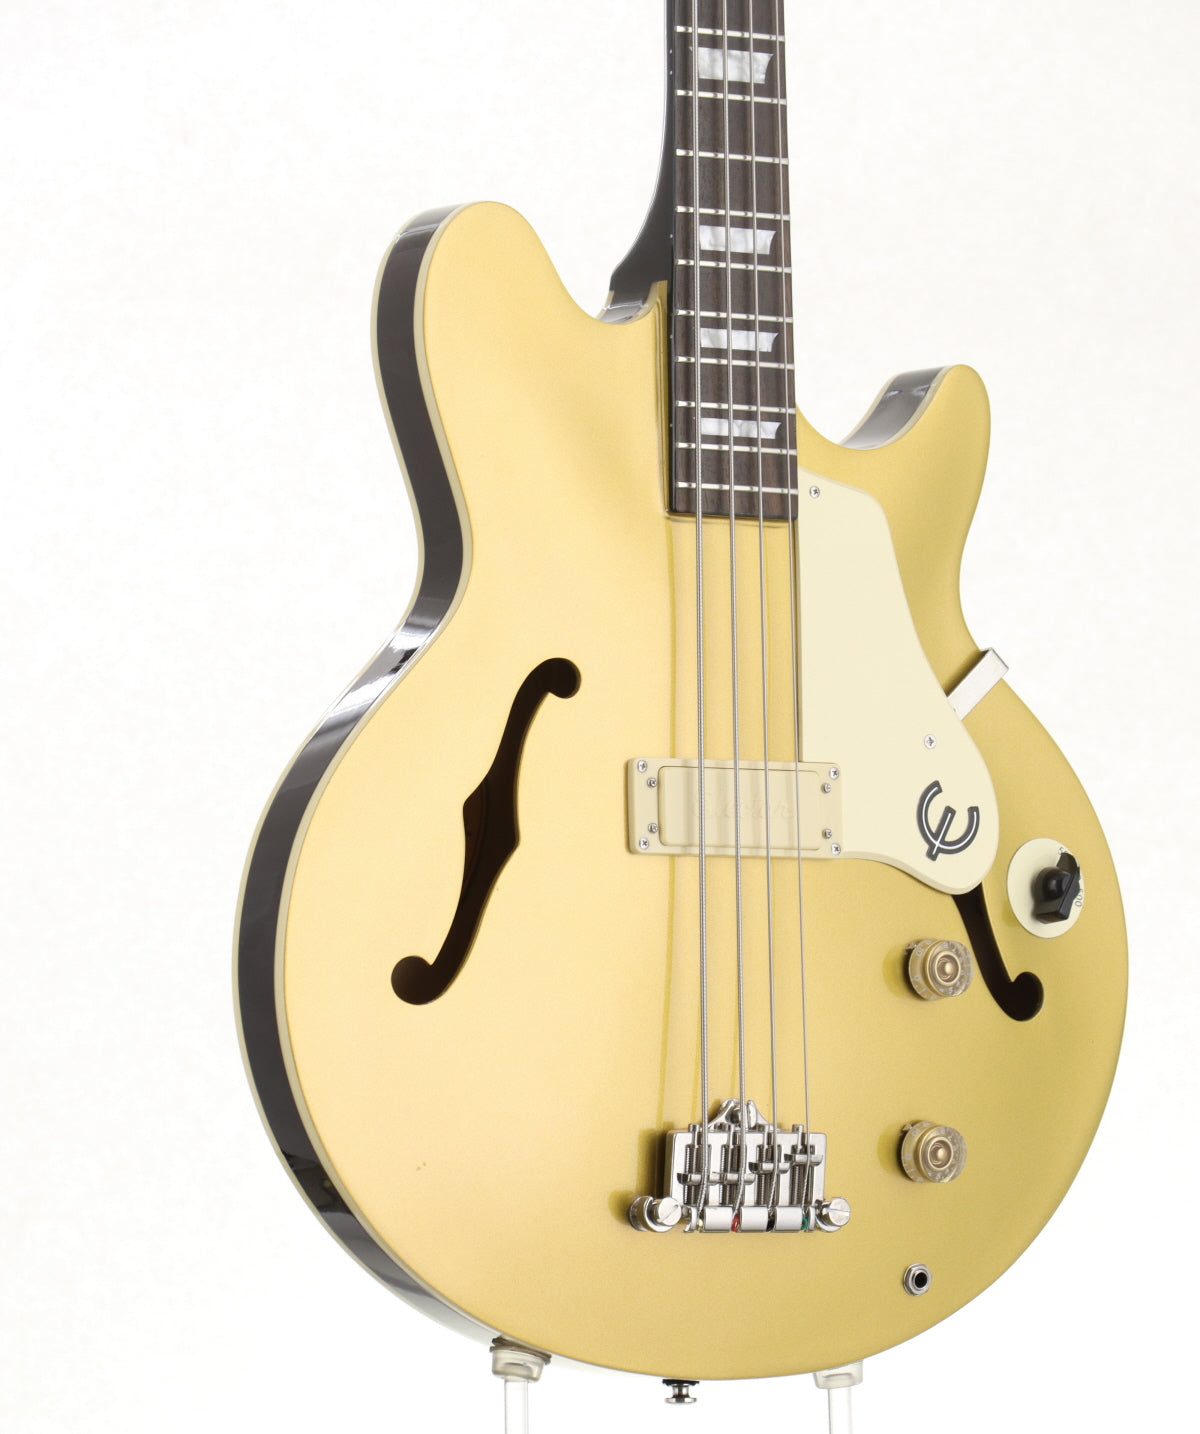 [SN 1101212185] USED Epiphone / Jack Casady Bass Metallic Gold "2ND" made in 2011 [08]